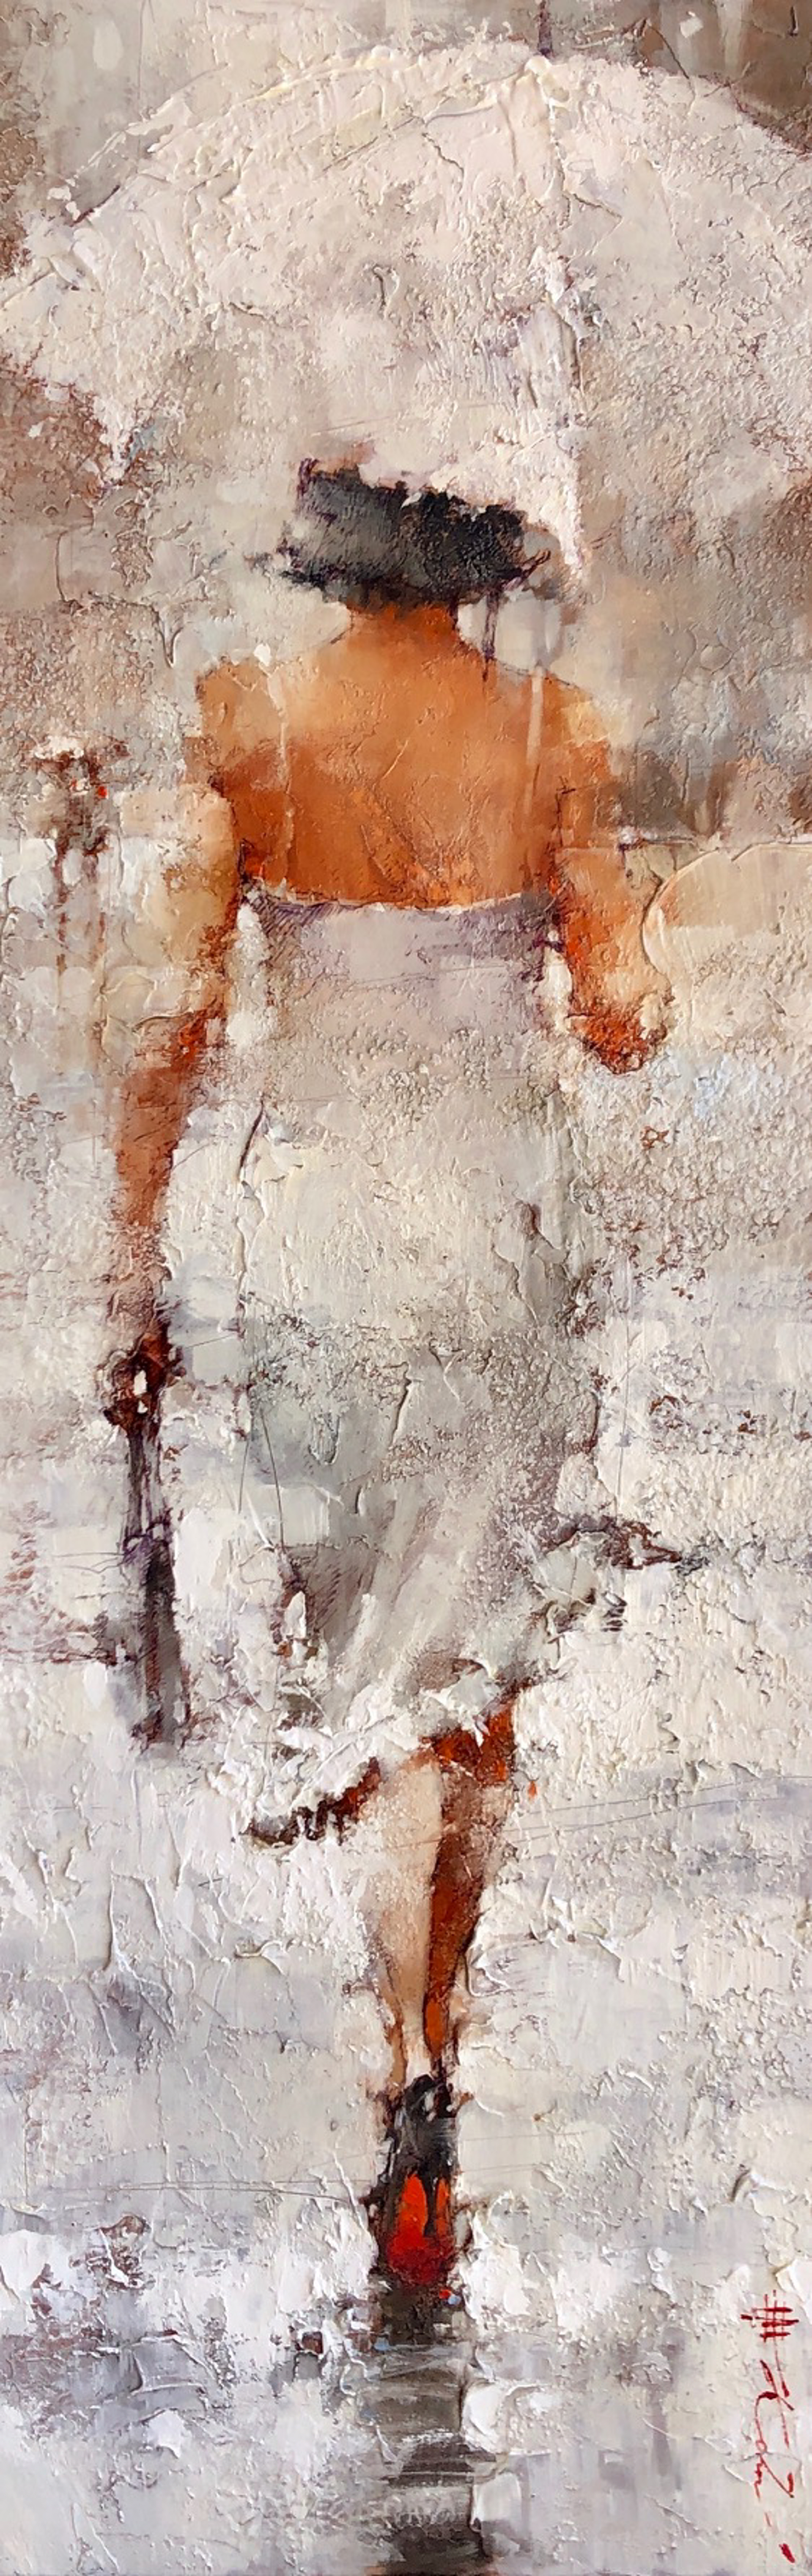 "On The Theme Of White" Series #6 by Andre Kohn